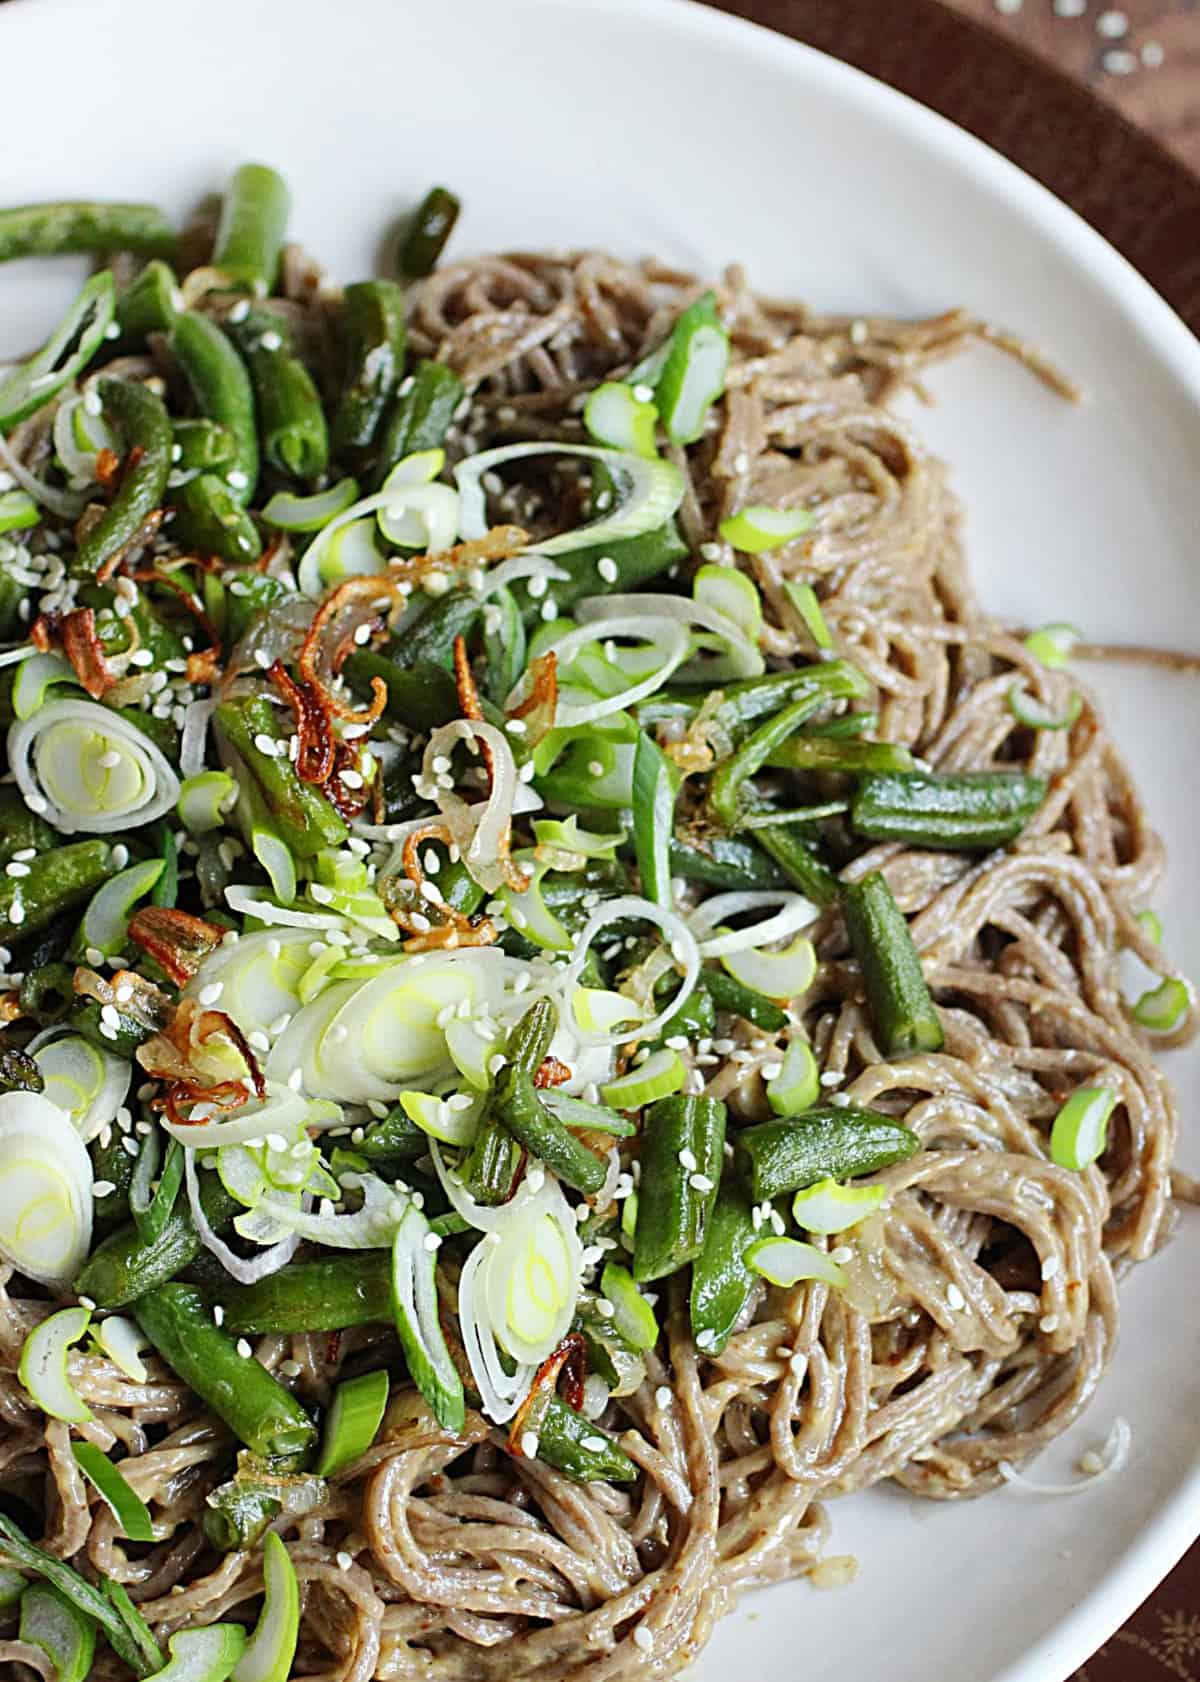 Soba noodle salad with green beans and shallots on white plate, close-up image